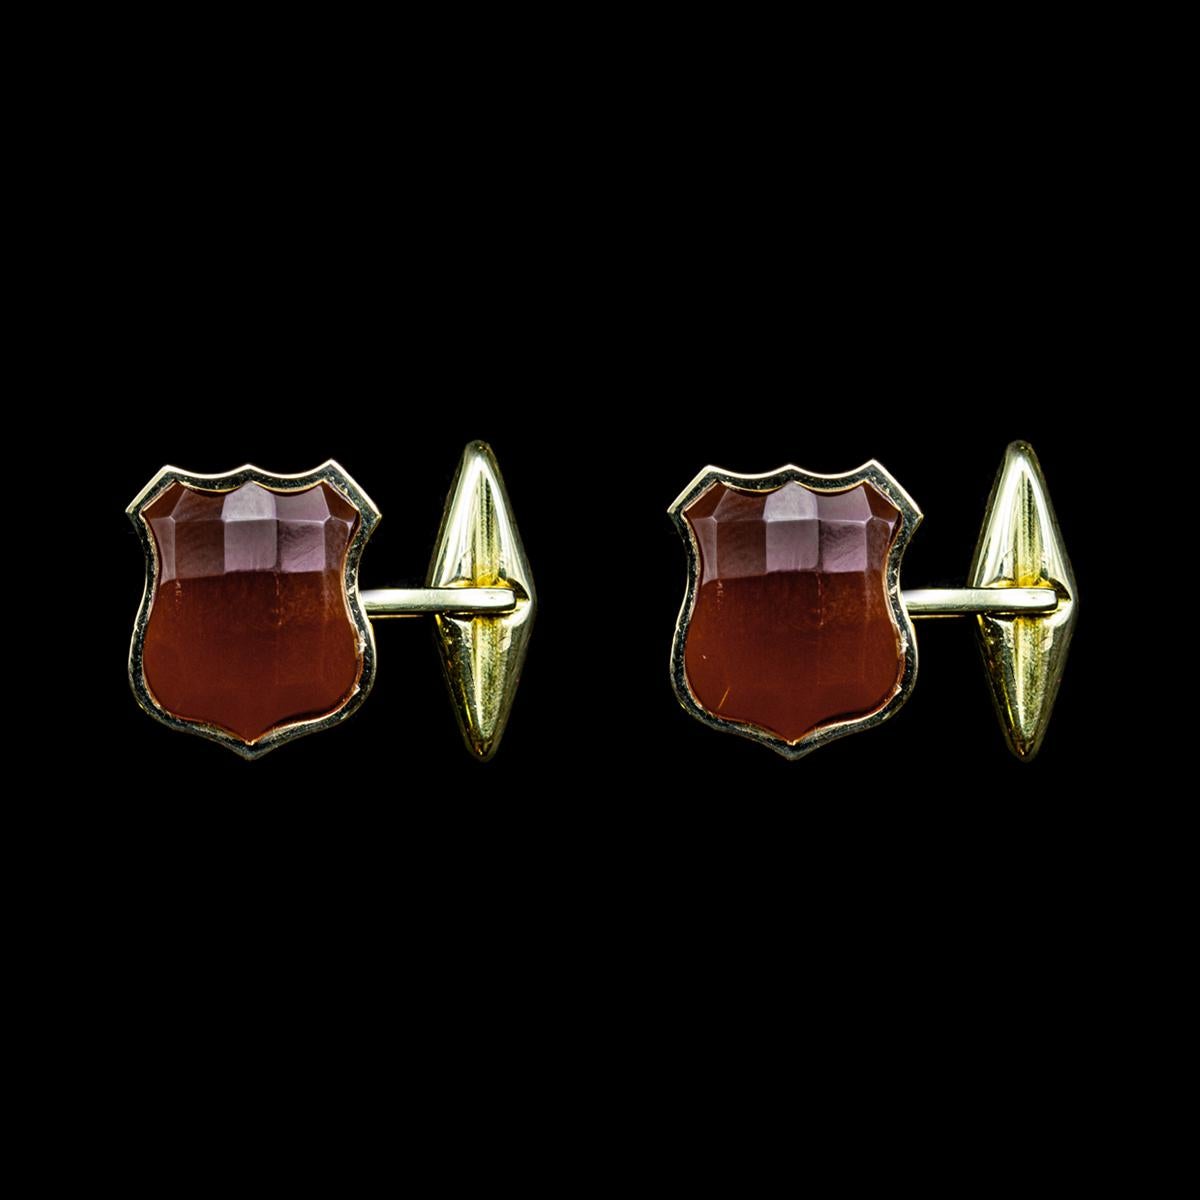 18 kt yellow gold cufflinks with faceted carnelian shields. Carnelian is a variety of chalcedony and takes on the typical red color thanks to the presence of iron inside. This stone for the ancient Egyptians symbolized life. Over time, shirt